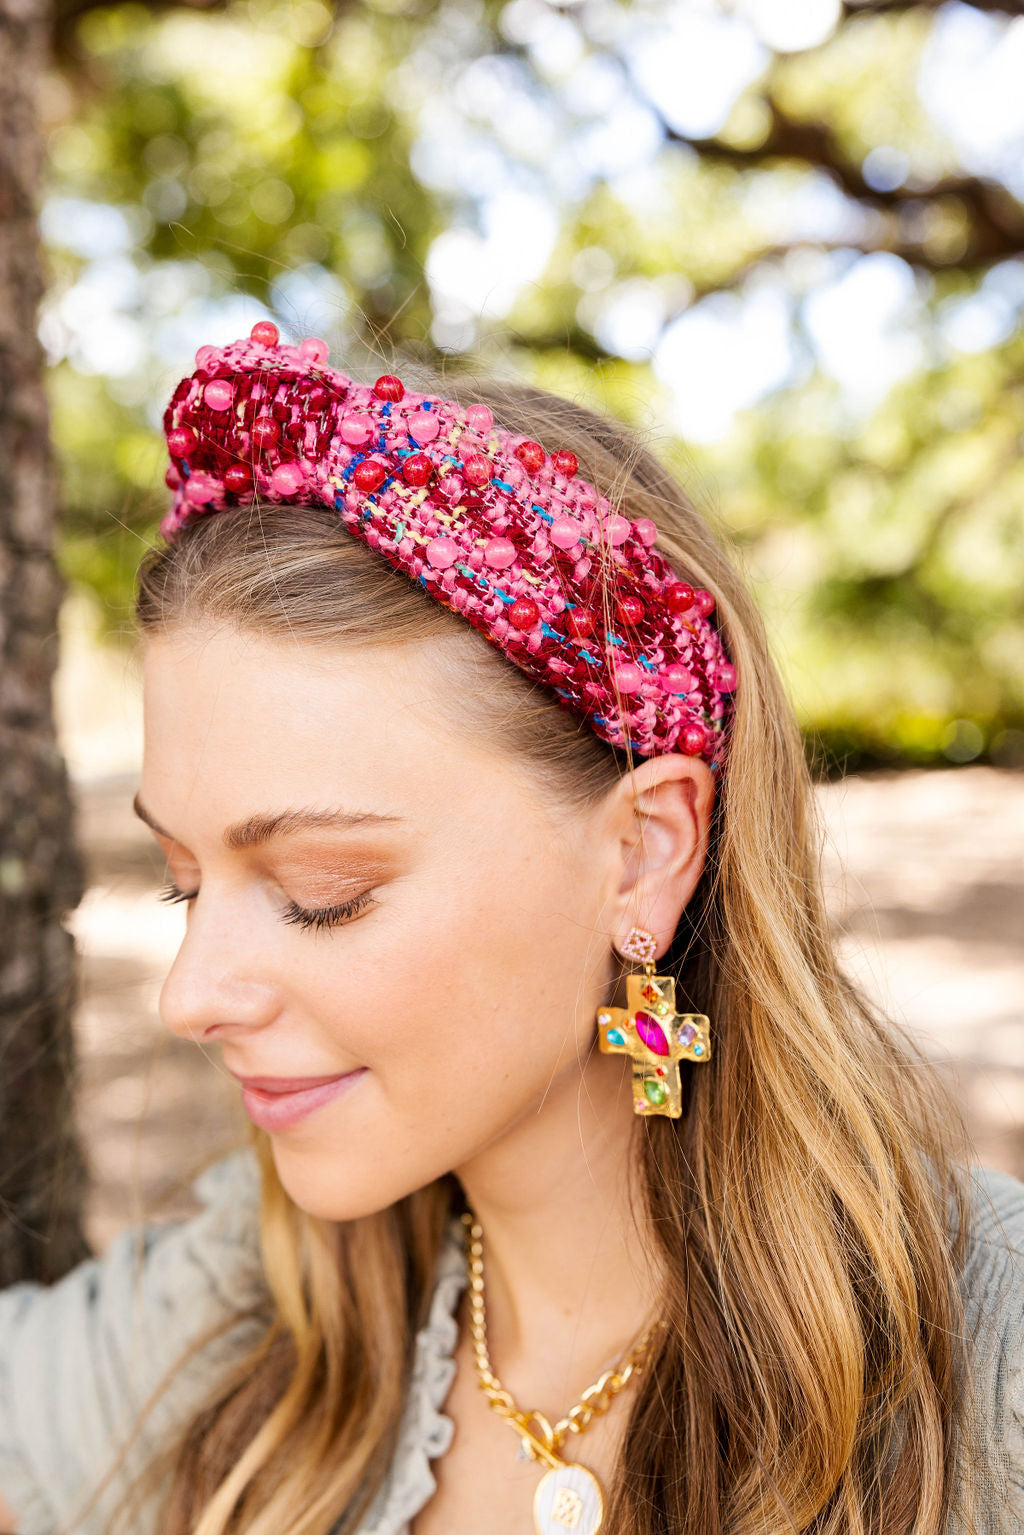 Pink & Red Tweed Headband with Beads